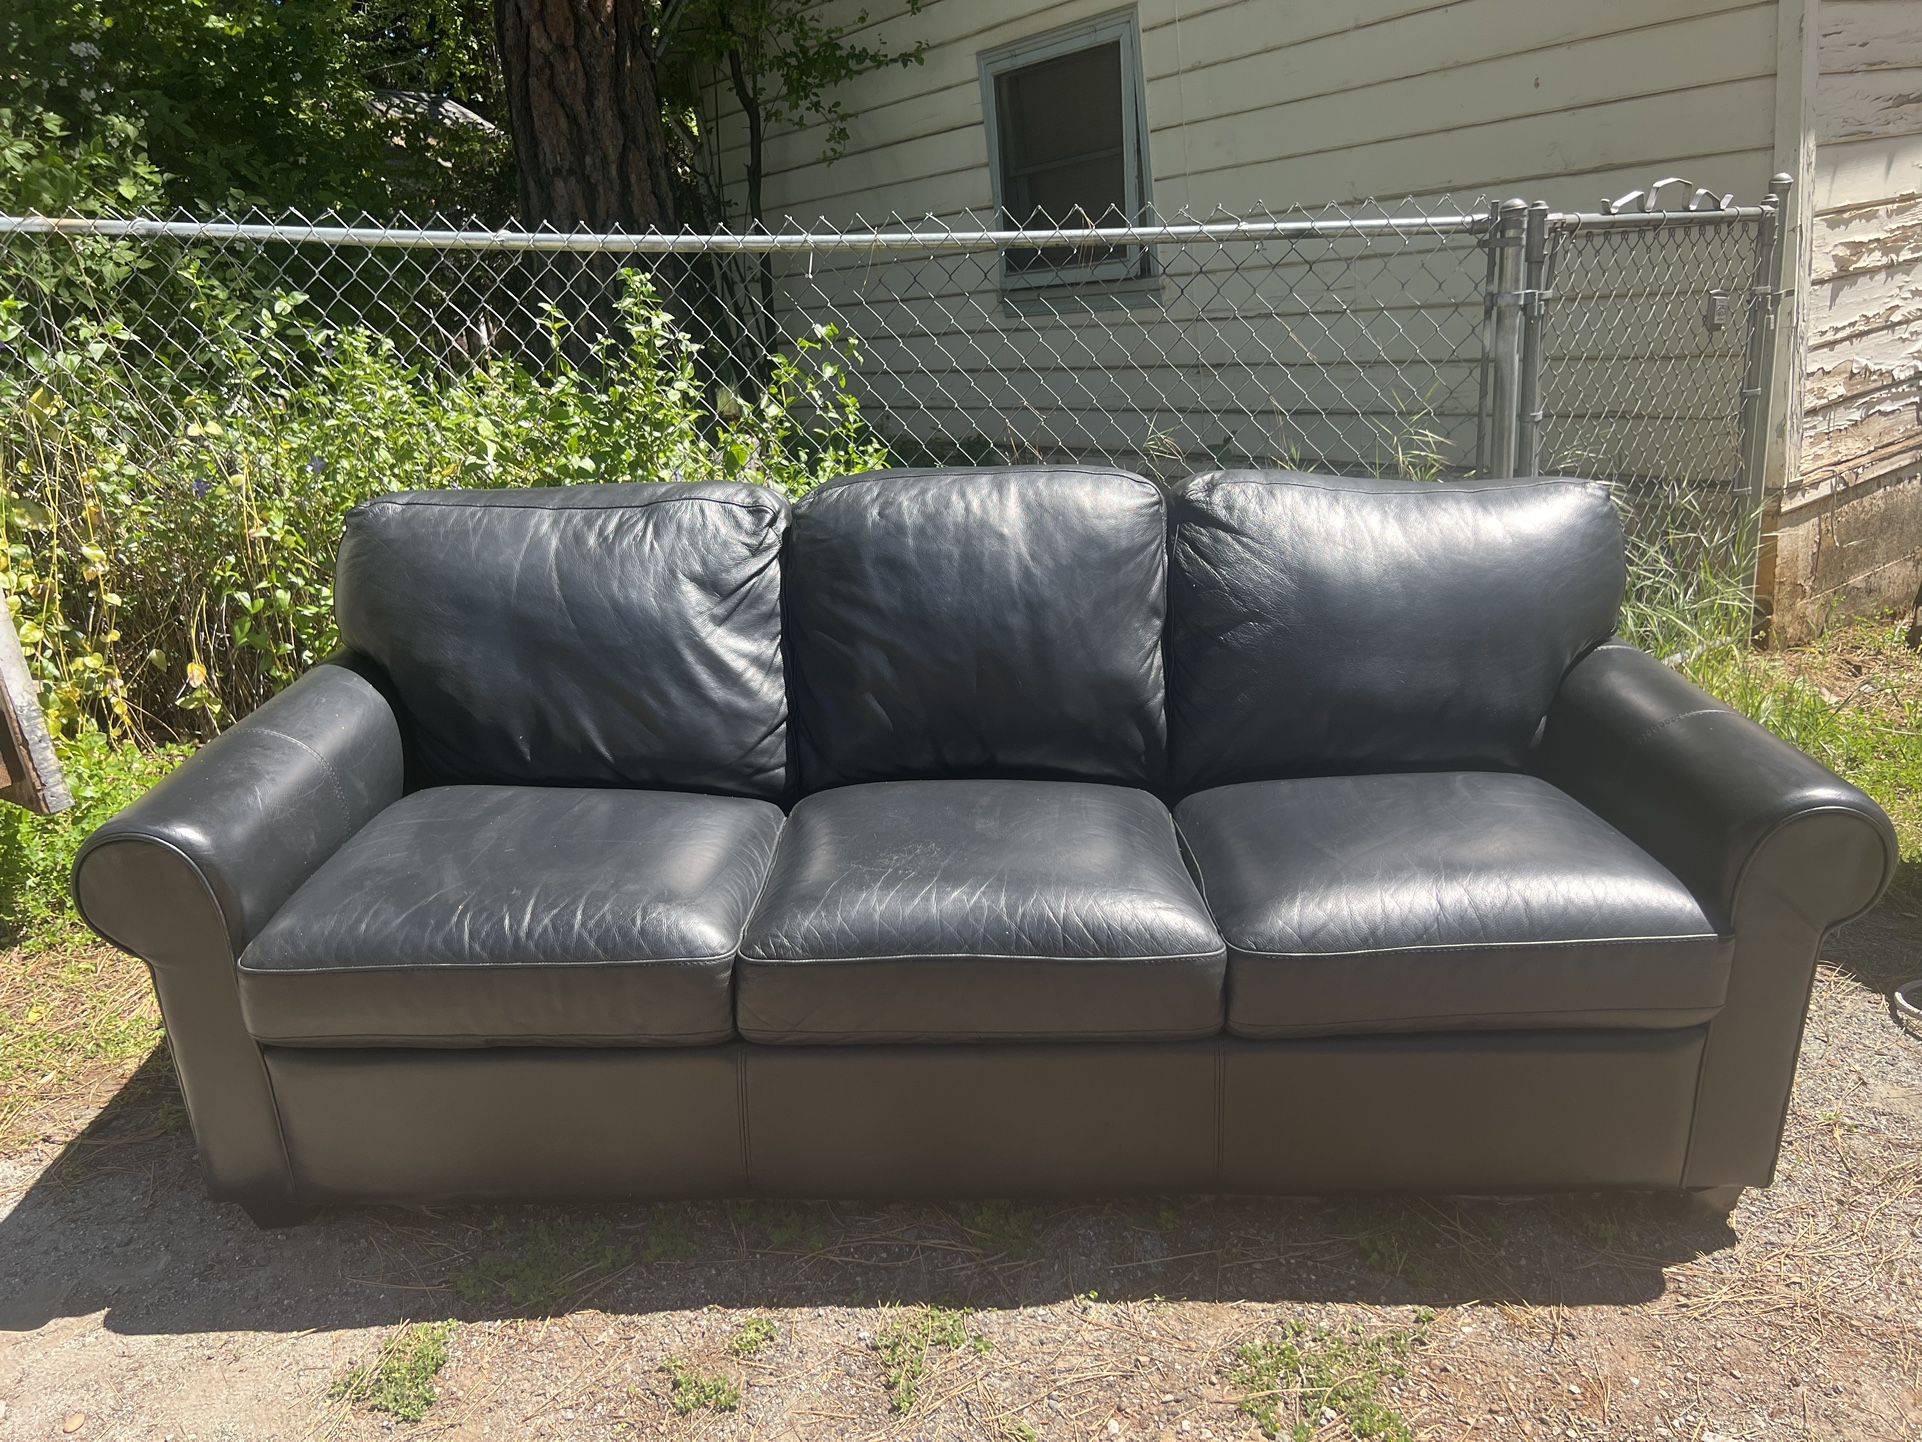 Black Leather Macy’s Couch